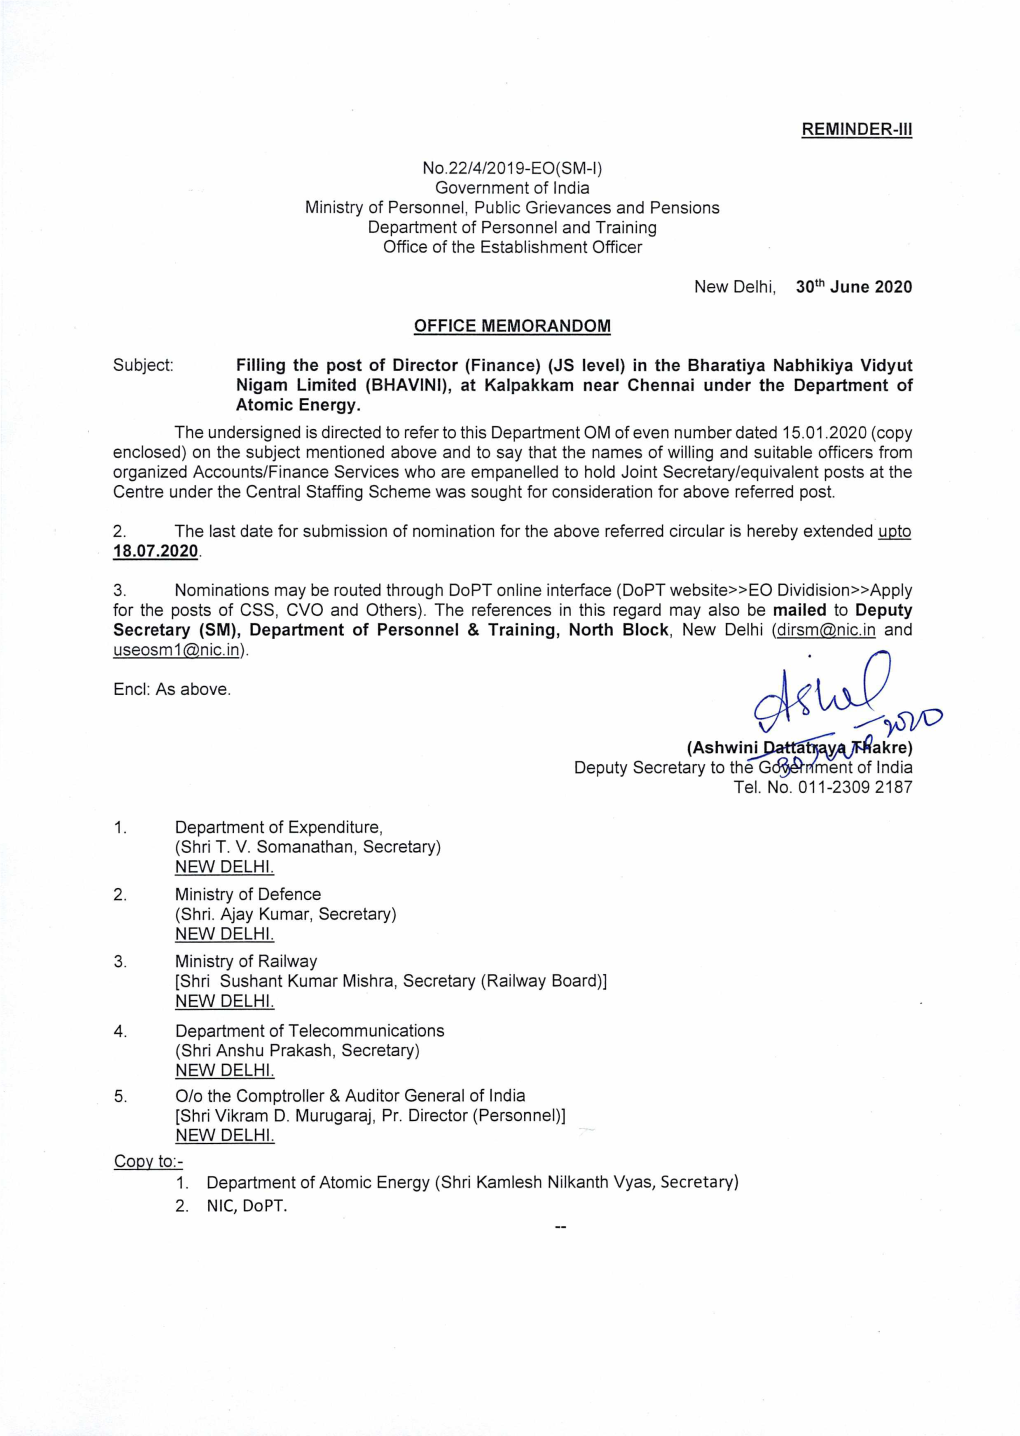 Government of India Ministry of Personnel, Public Grievances and Pensions Department of Personnel and Training Office of the Establishment Officer